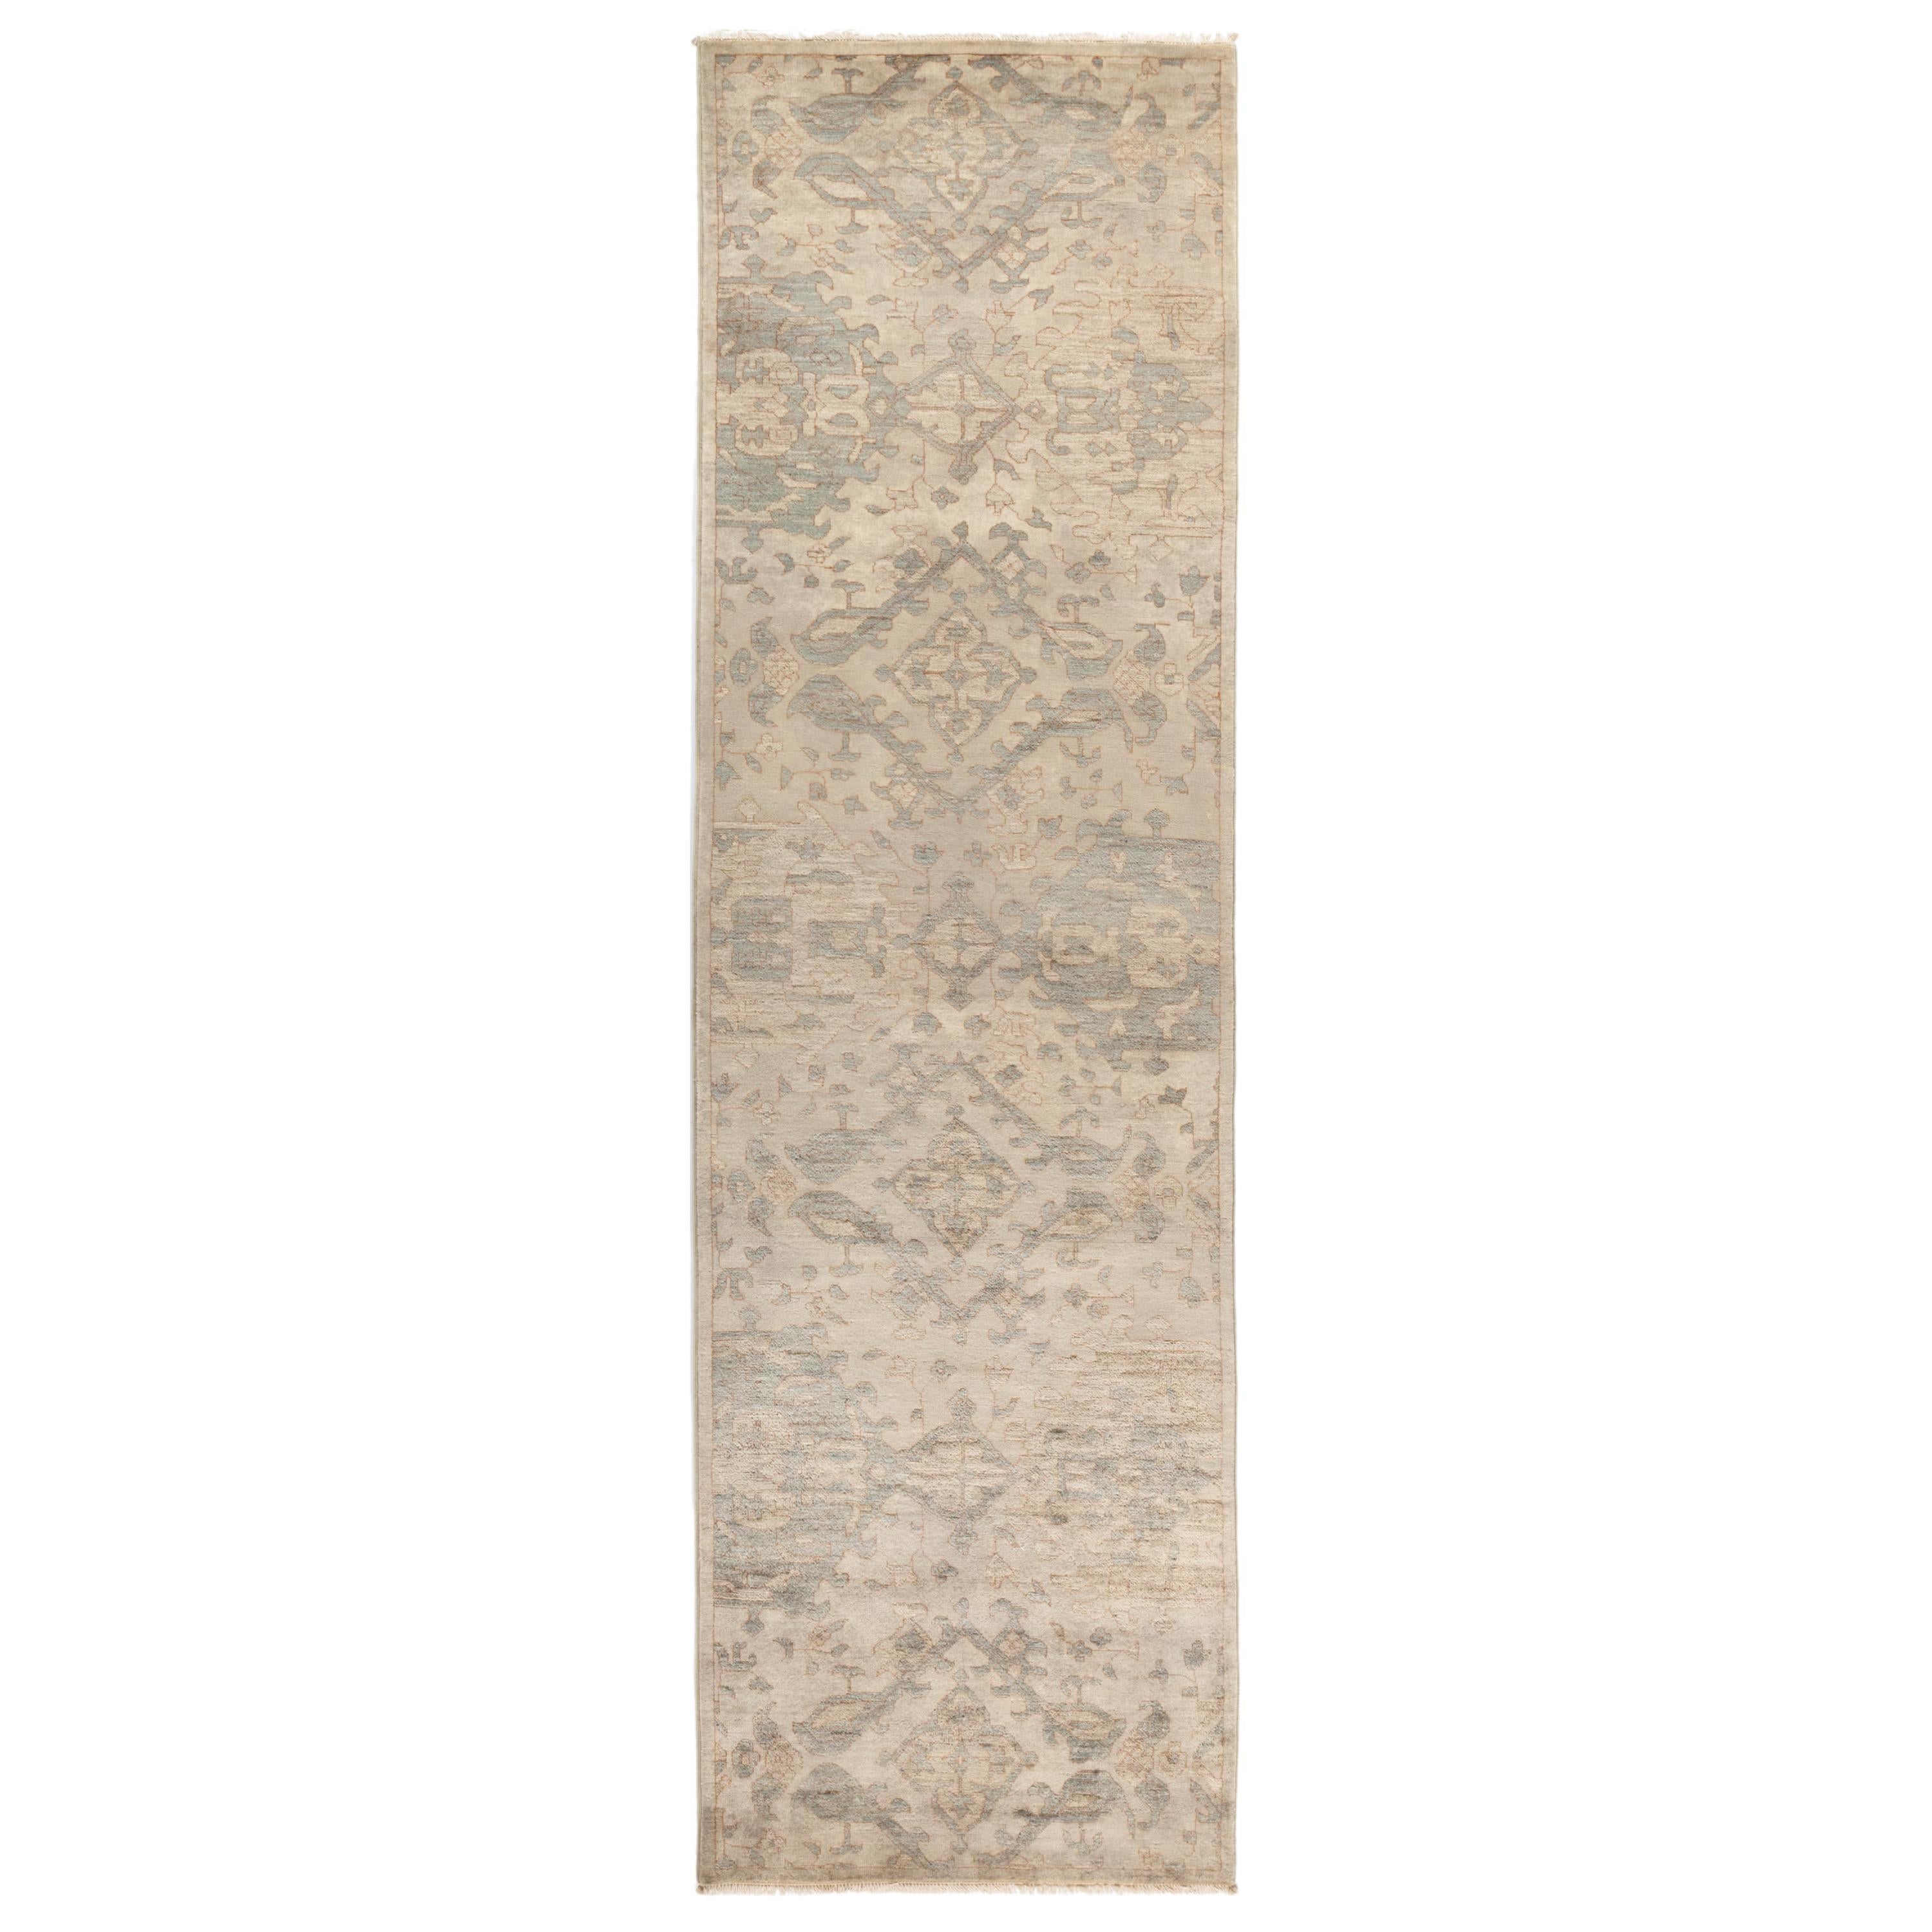 One of a Kind Colorful Wool Hand Knotted Runner Rug, Bone